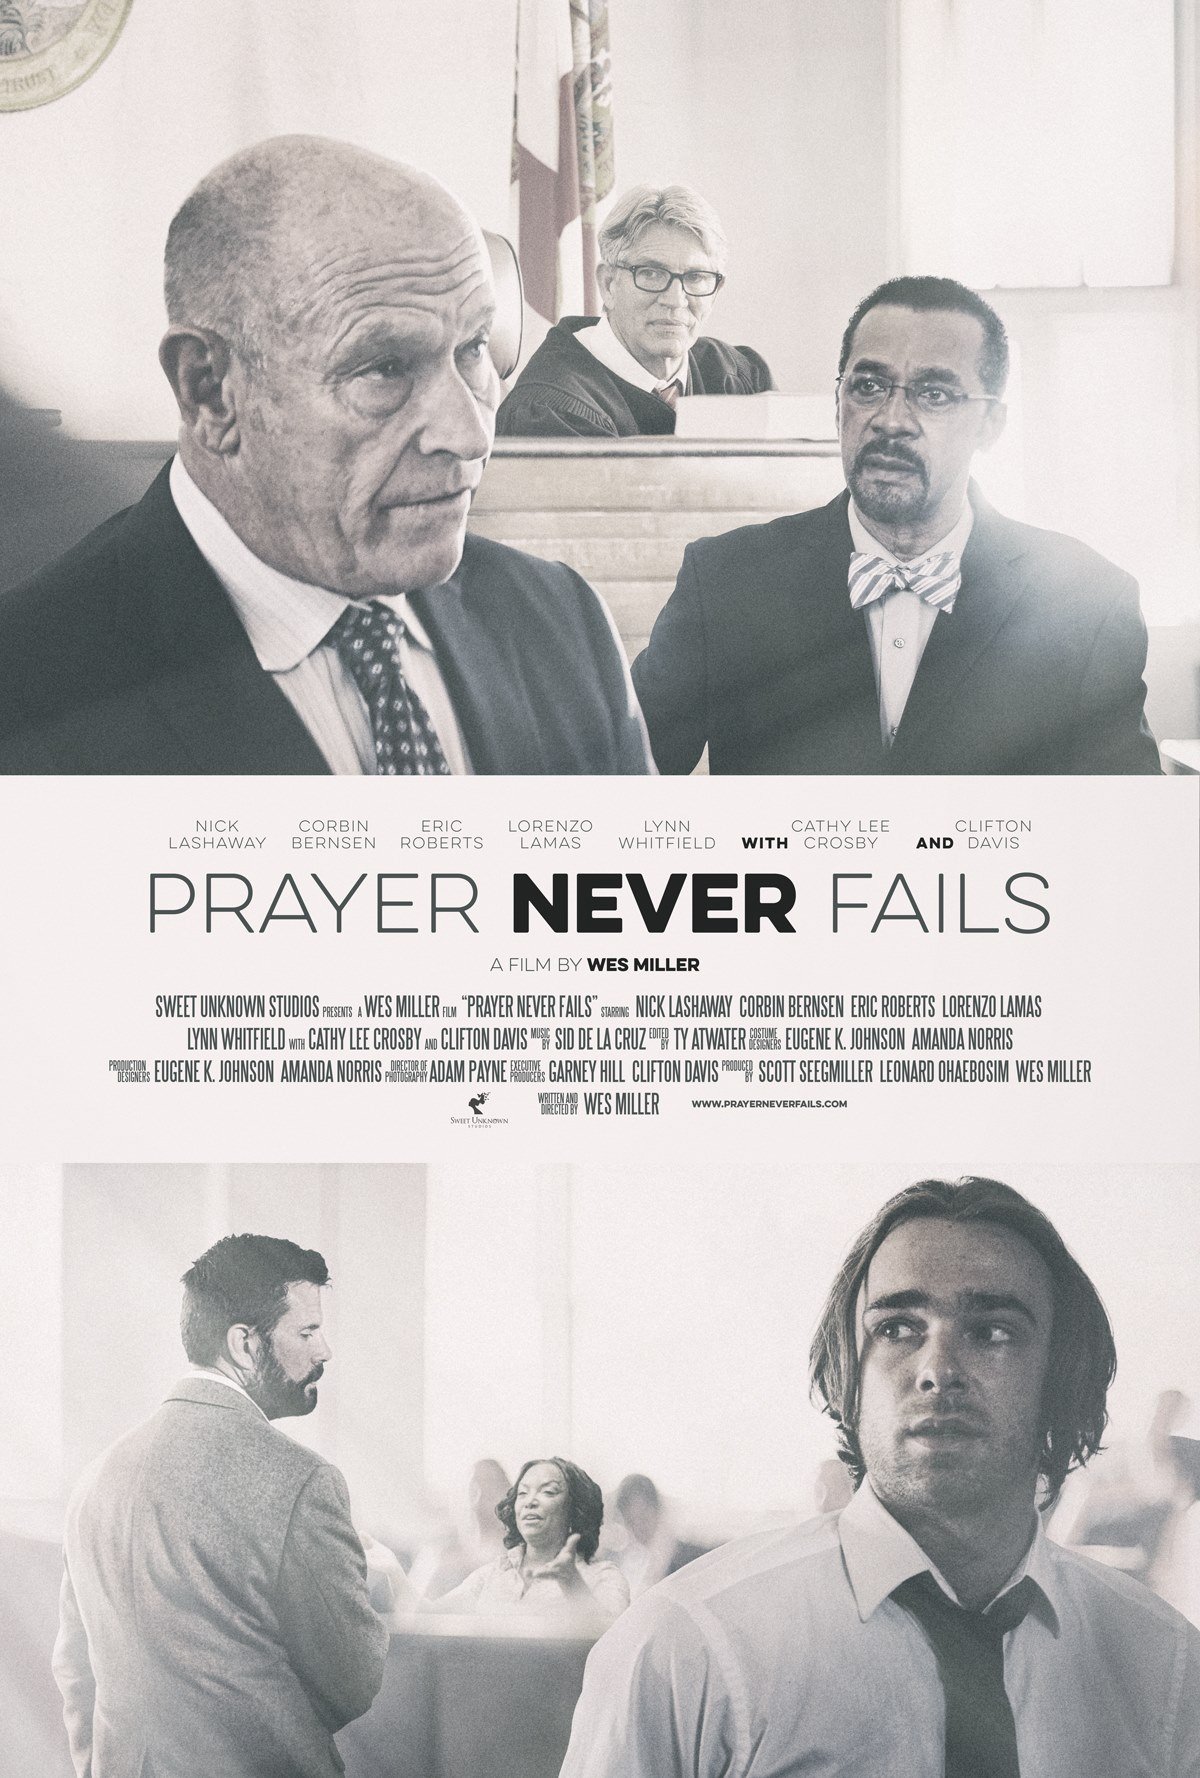 Poster of the movie Prayer Never Fails